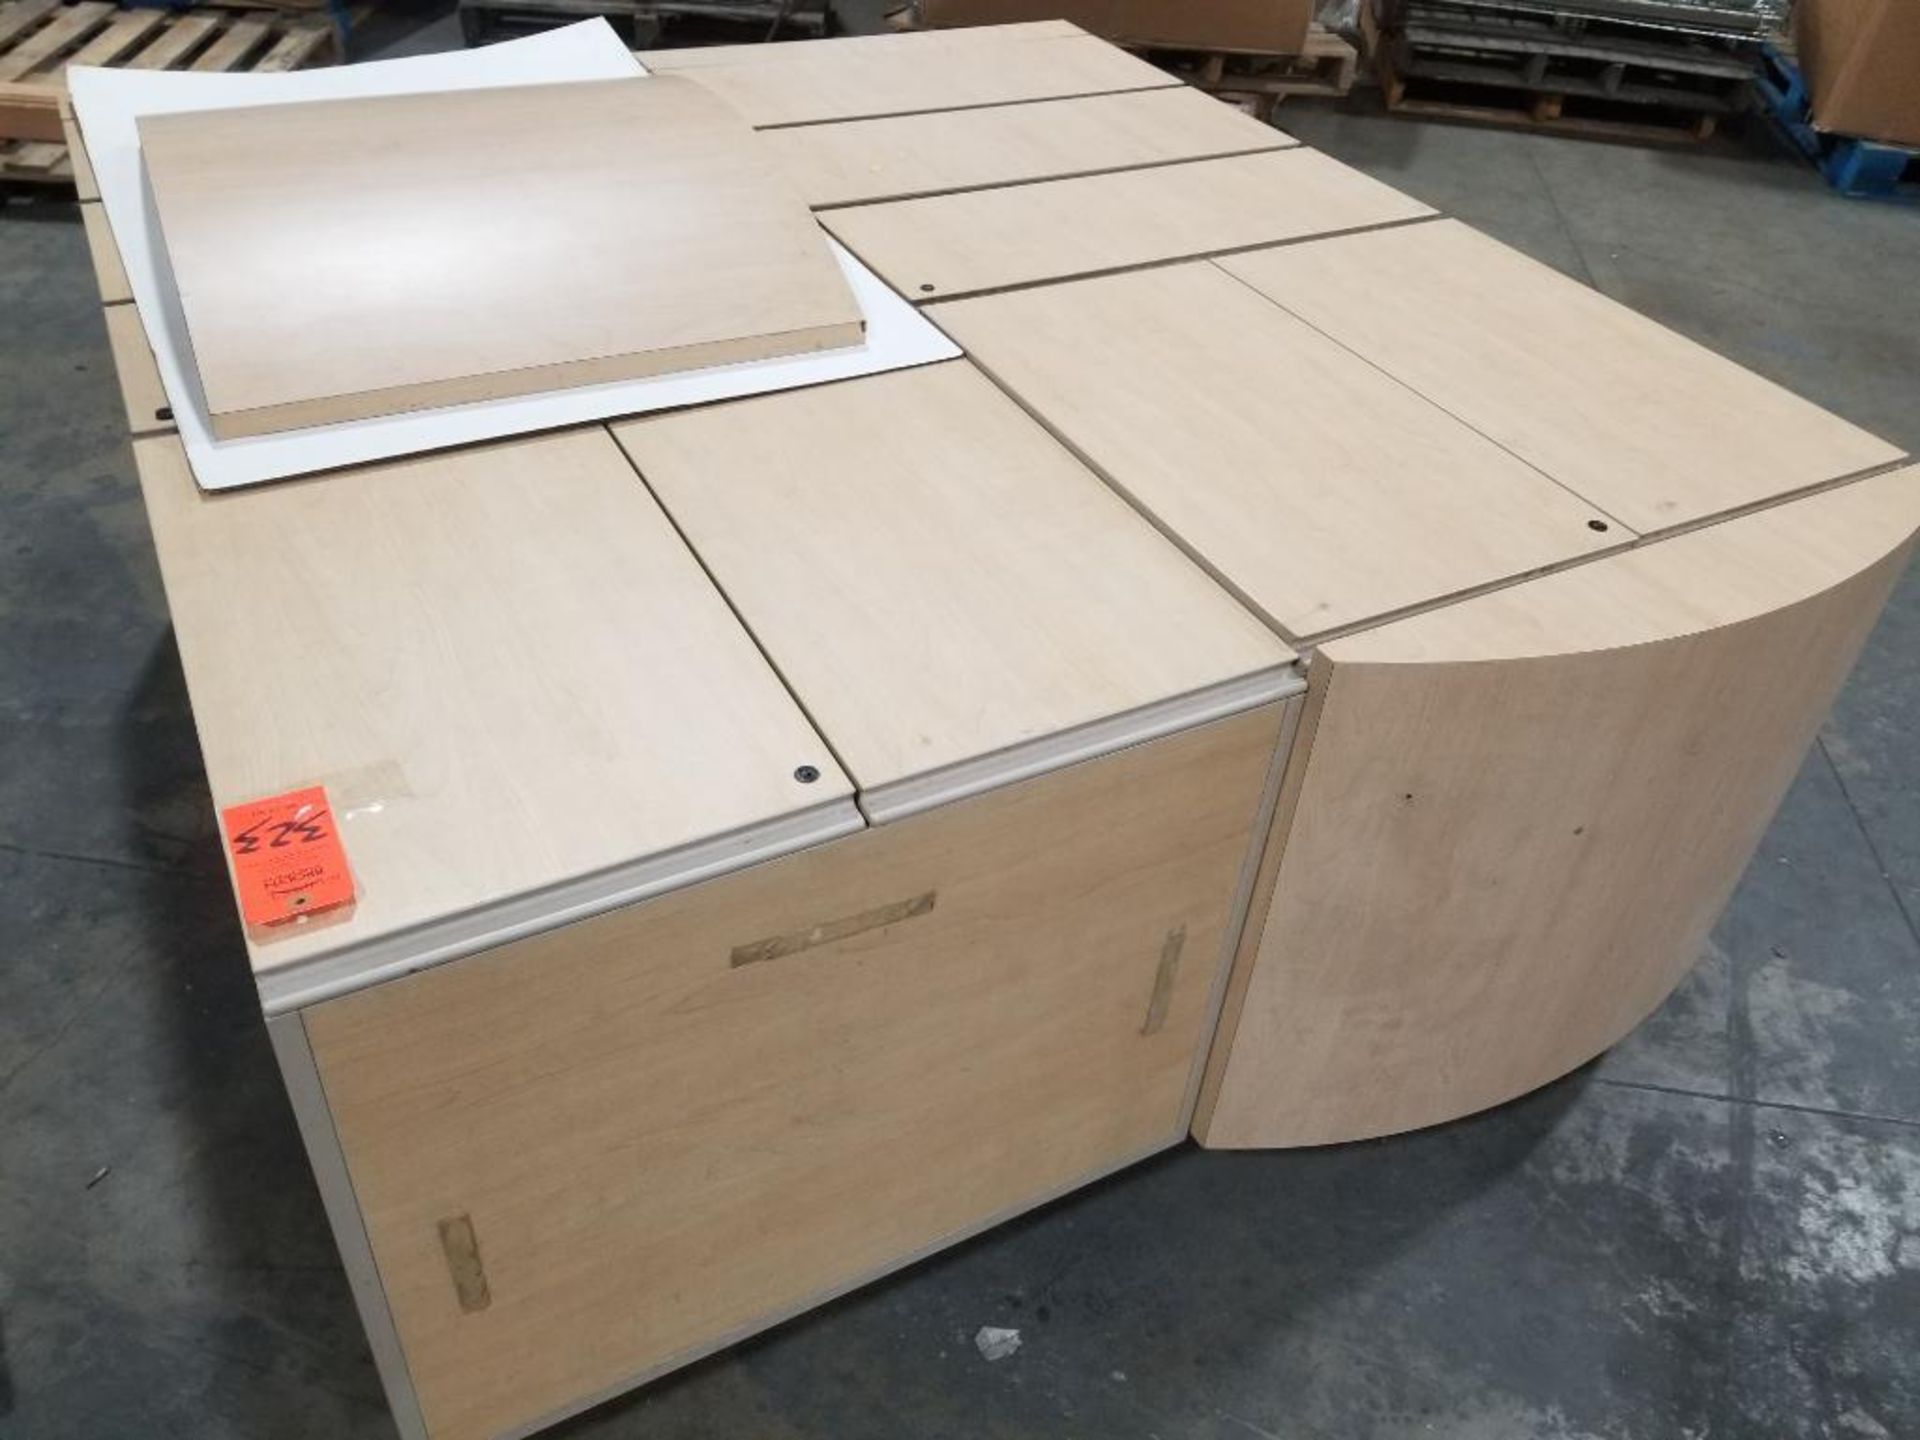 Qty 2 - Storage cabinets. - Image 8 of 10